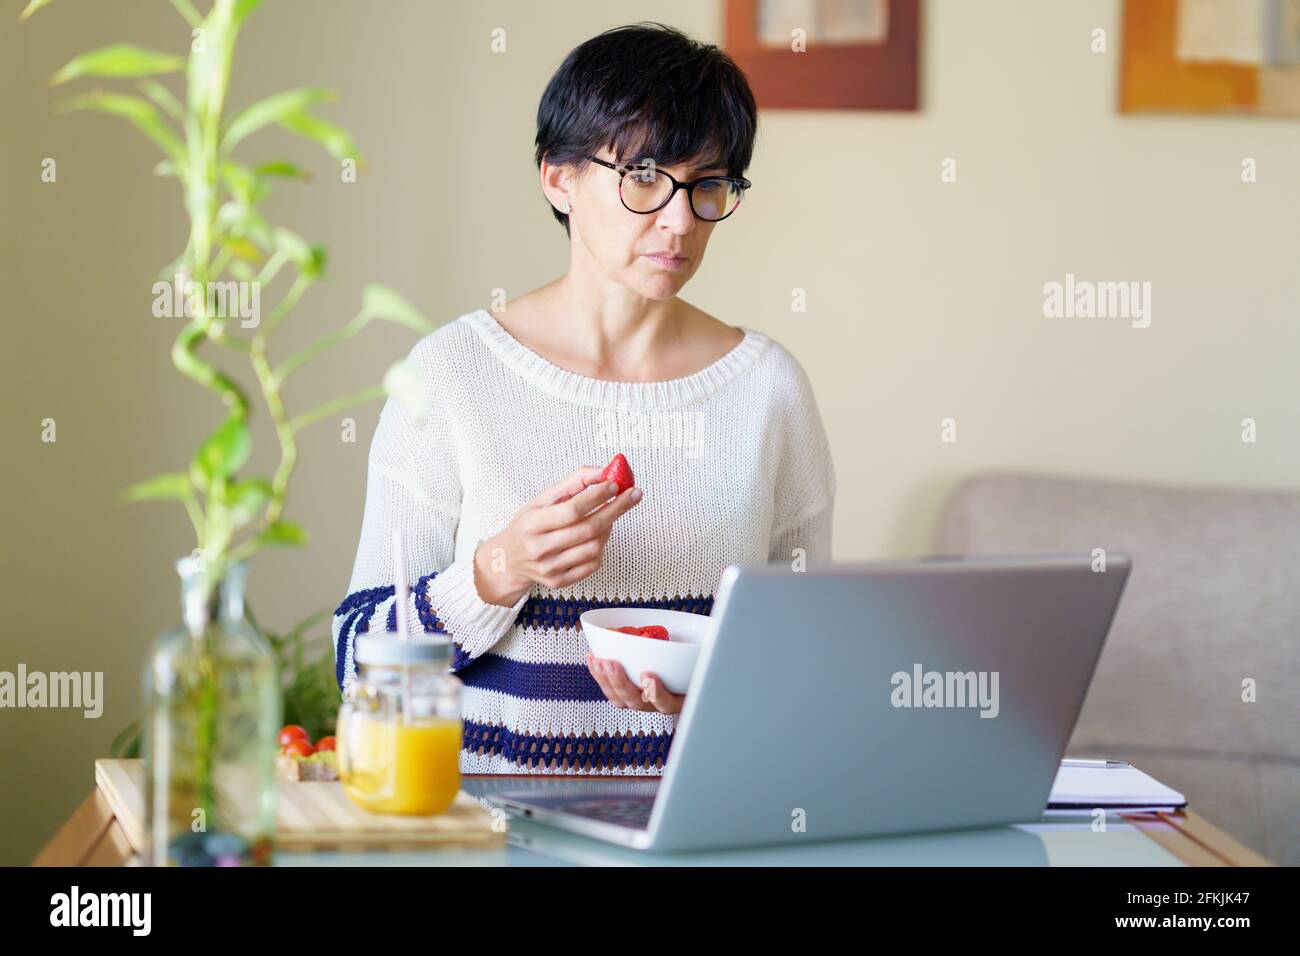 Woman eating strawberries while teleworking from home on her laptop Stock Photo